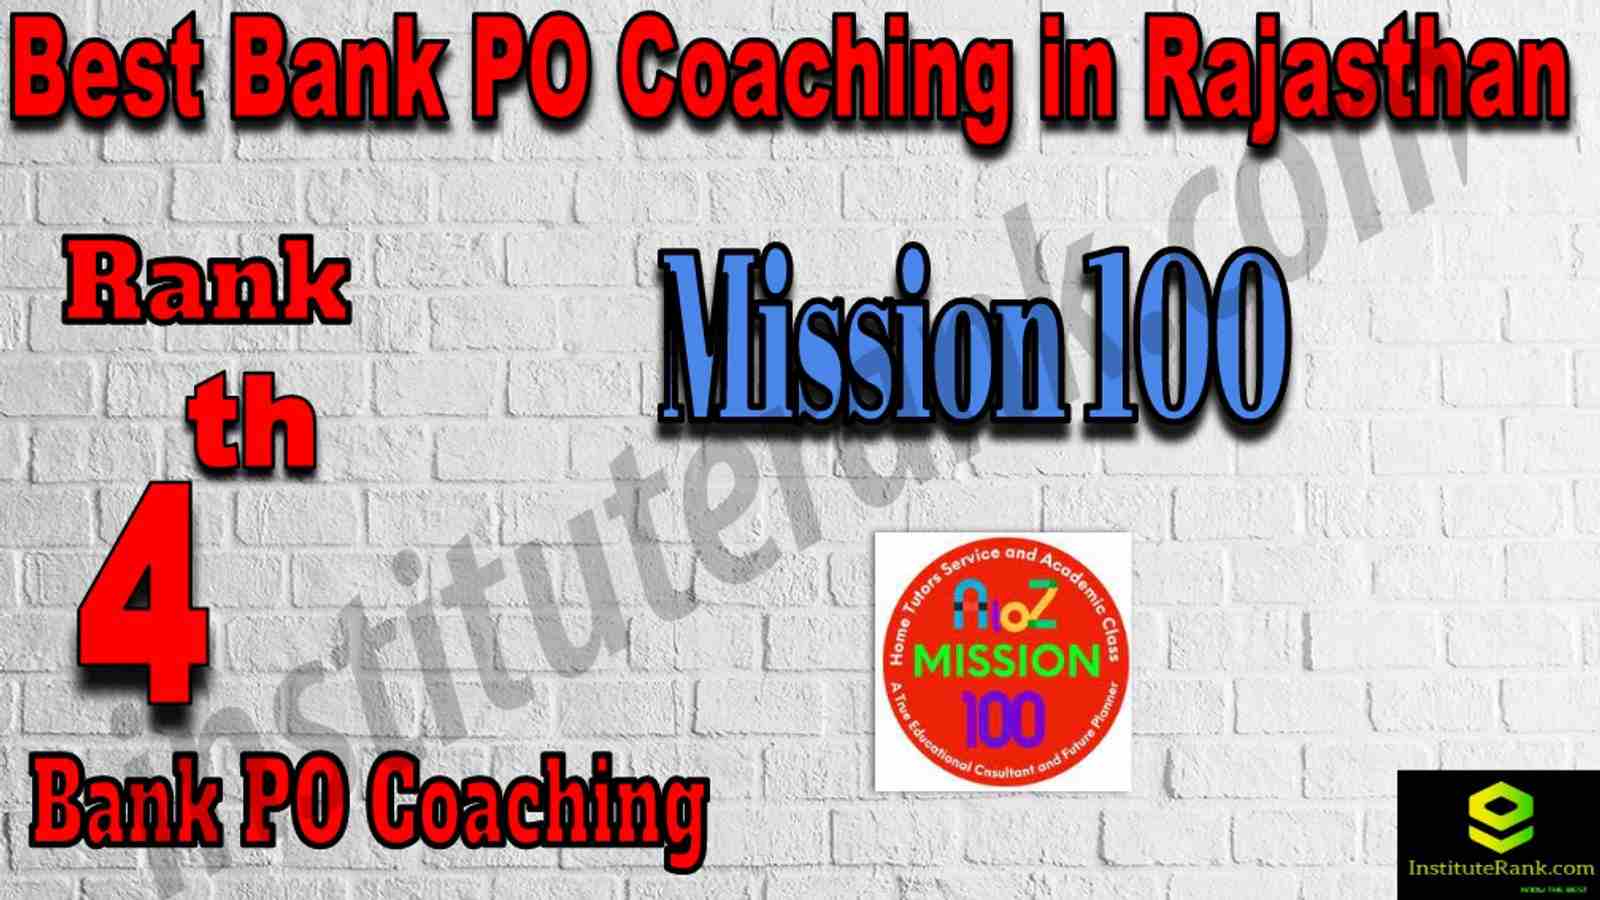 4th Best Bank PO Coaching in Rajasthan